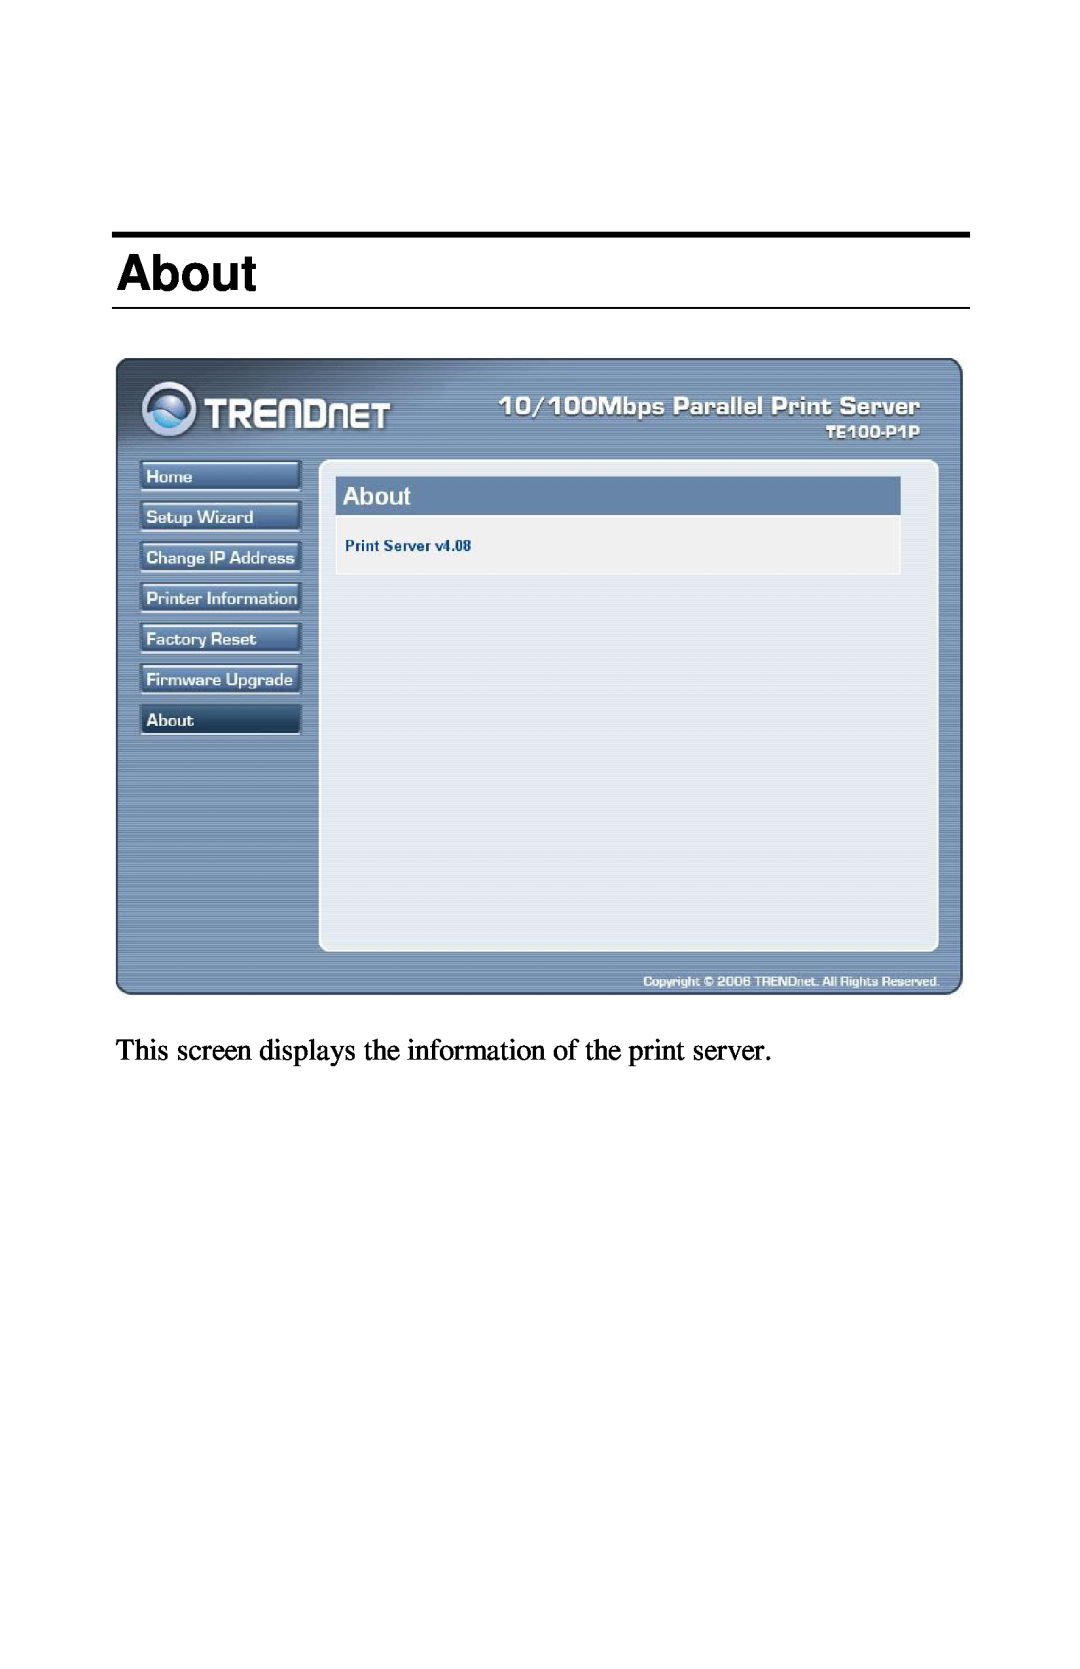 TRENDnet TE100-PIP manual About, This screen displays the information of the print server 